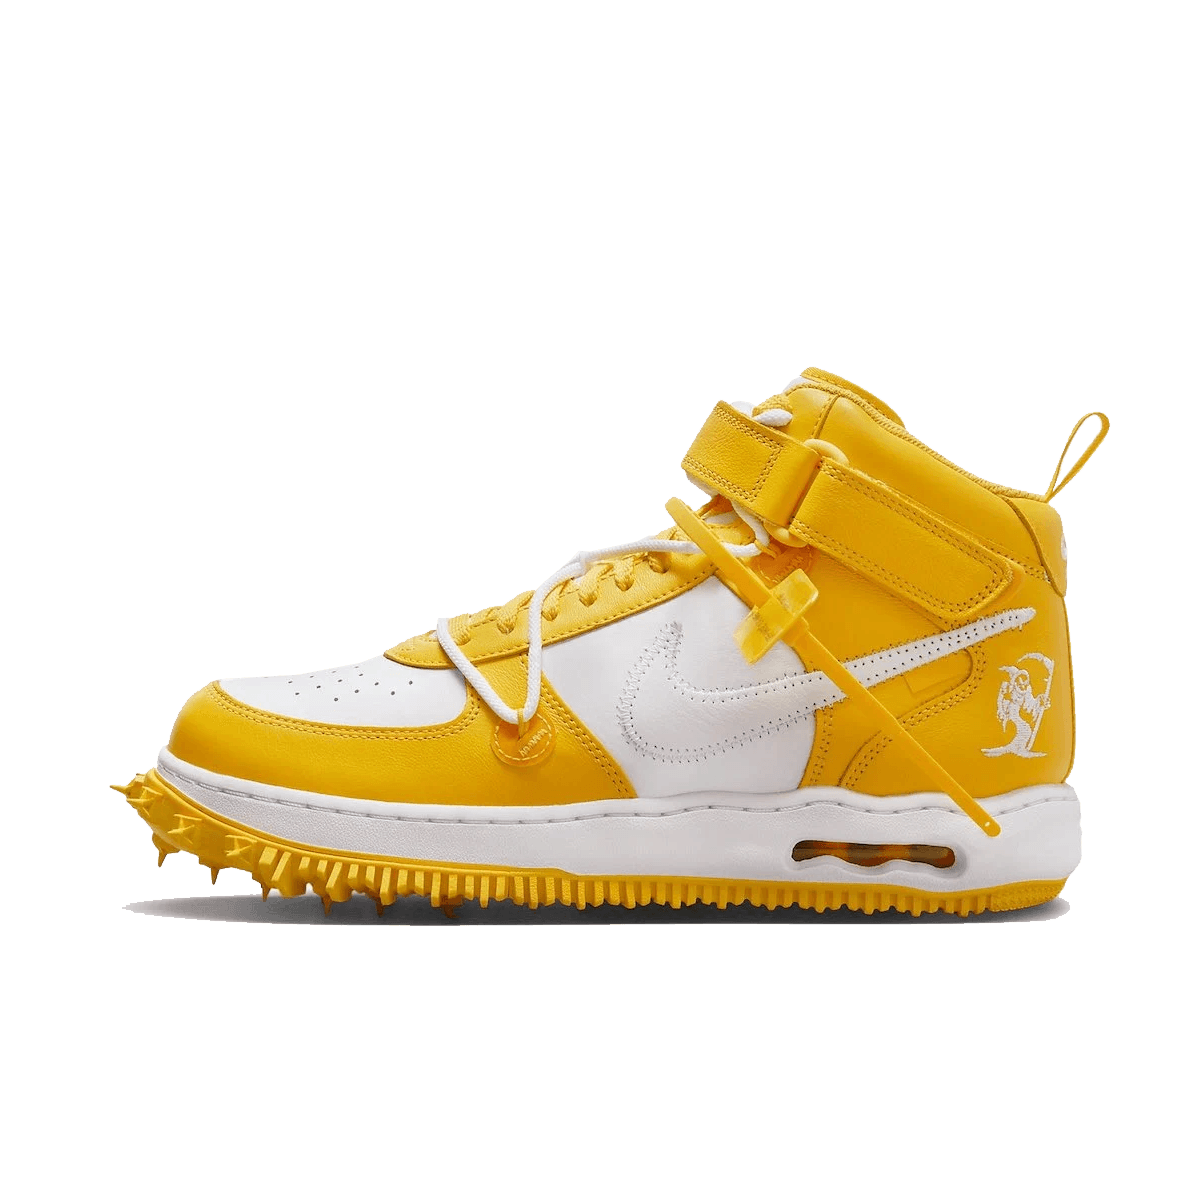 Off-White x Nike Air Force 1 Mid 'Varsity Maize'